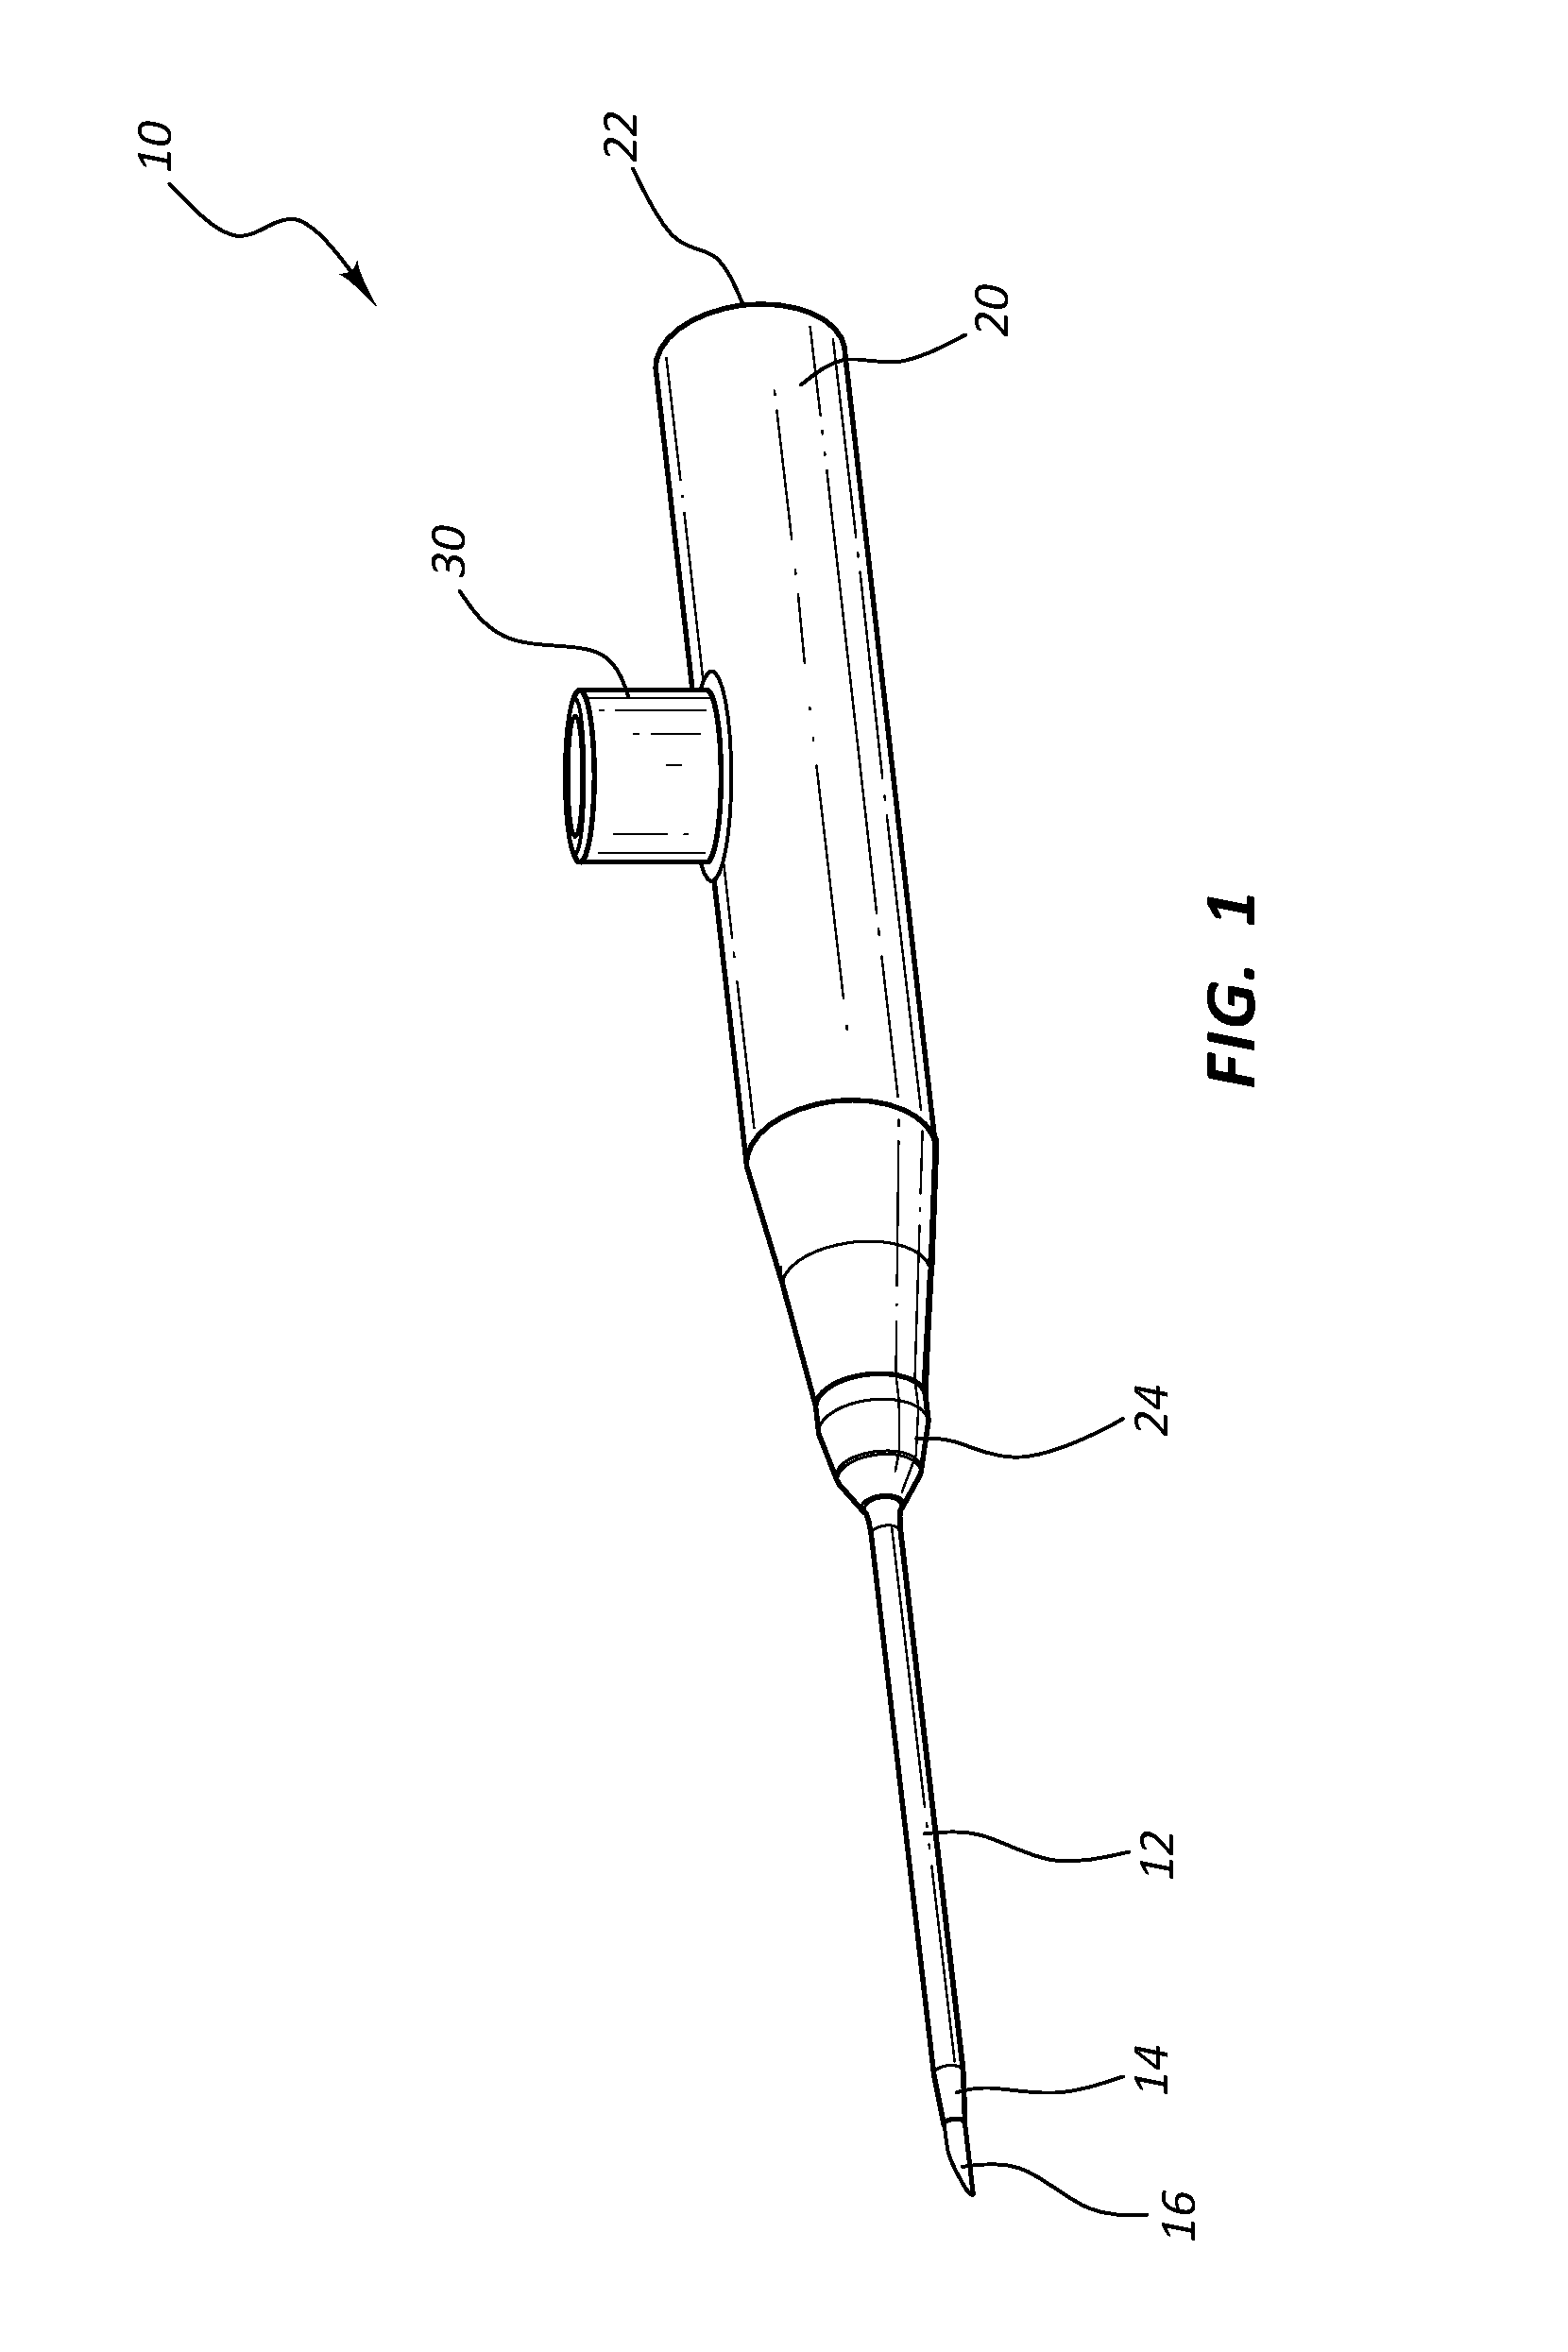 Ported catheter adapter with integrated septum actuator retention